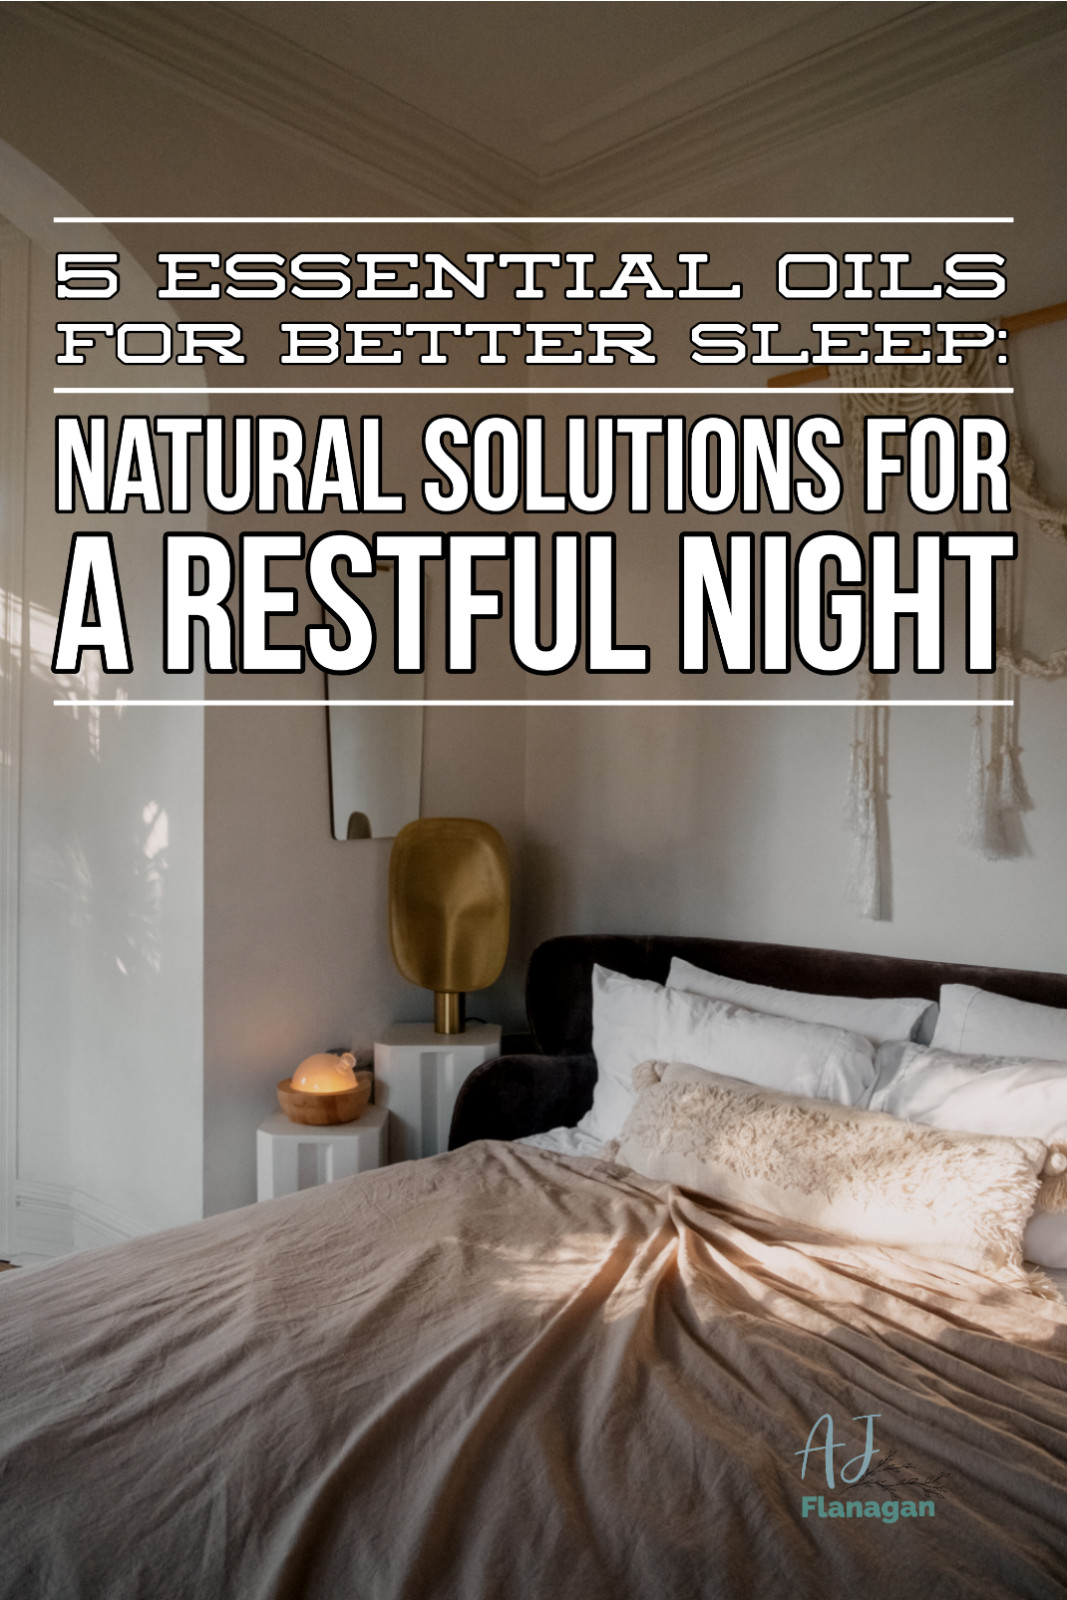 5 Essential Oils for Better Sleep: Natural Solutions for a Restful Night